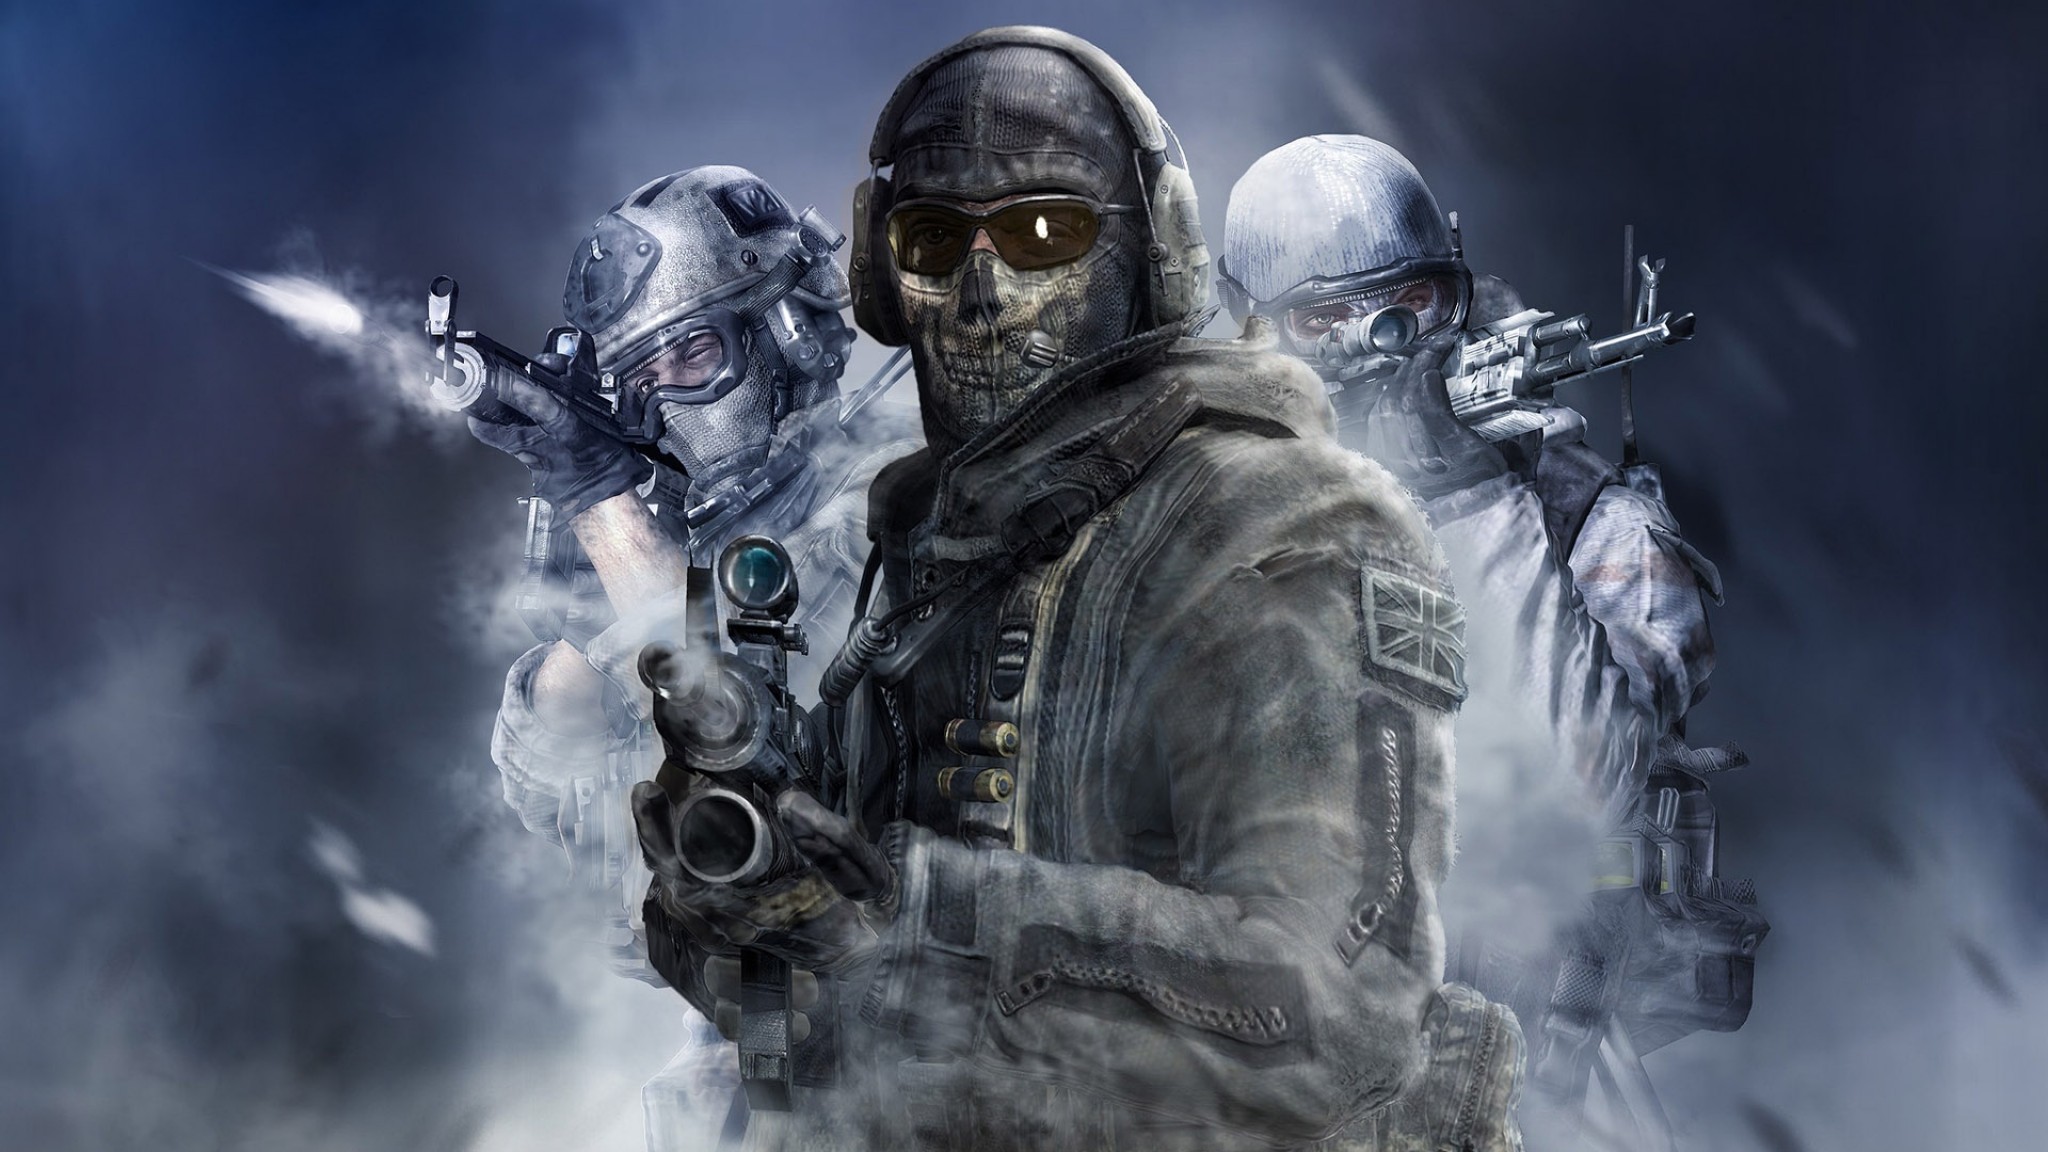 Why is Call of Duty's Ghost so famous?